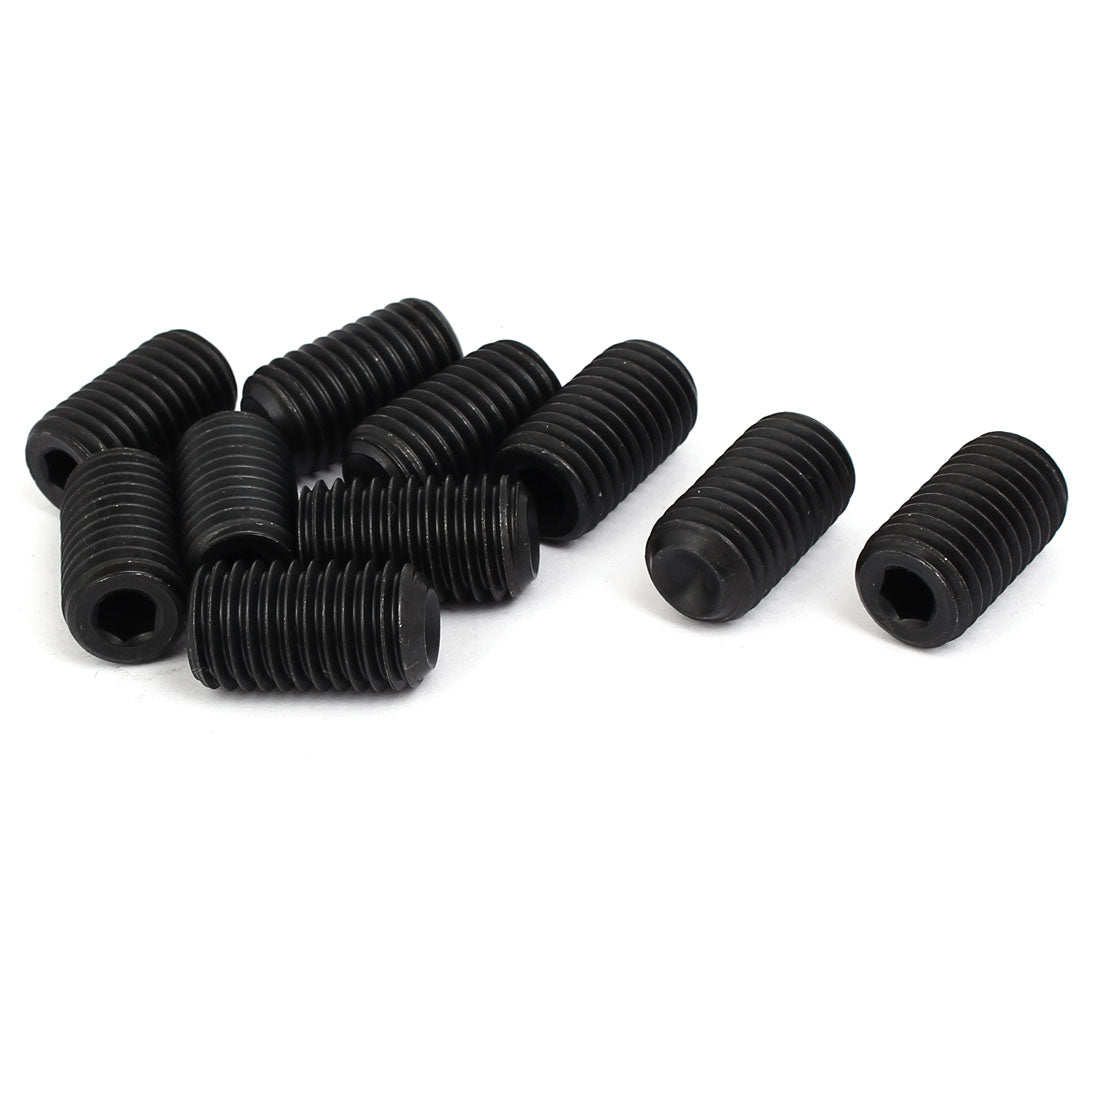 uxcell Uxcell M14 Dia 25mm Length Head Hex Socket Cup Point Grub Screw Black DIN916 10pcs